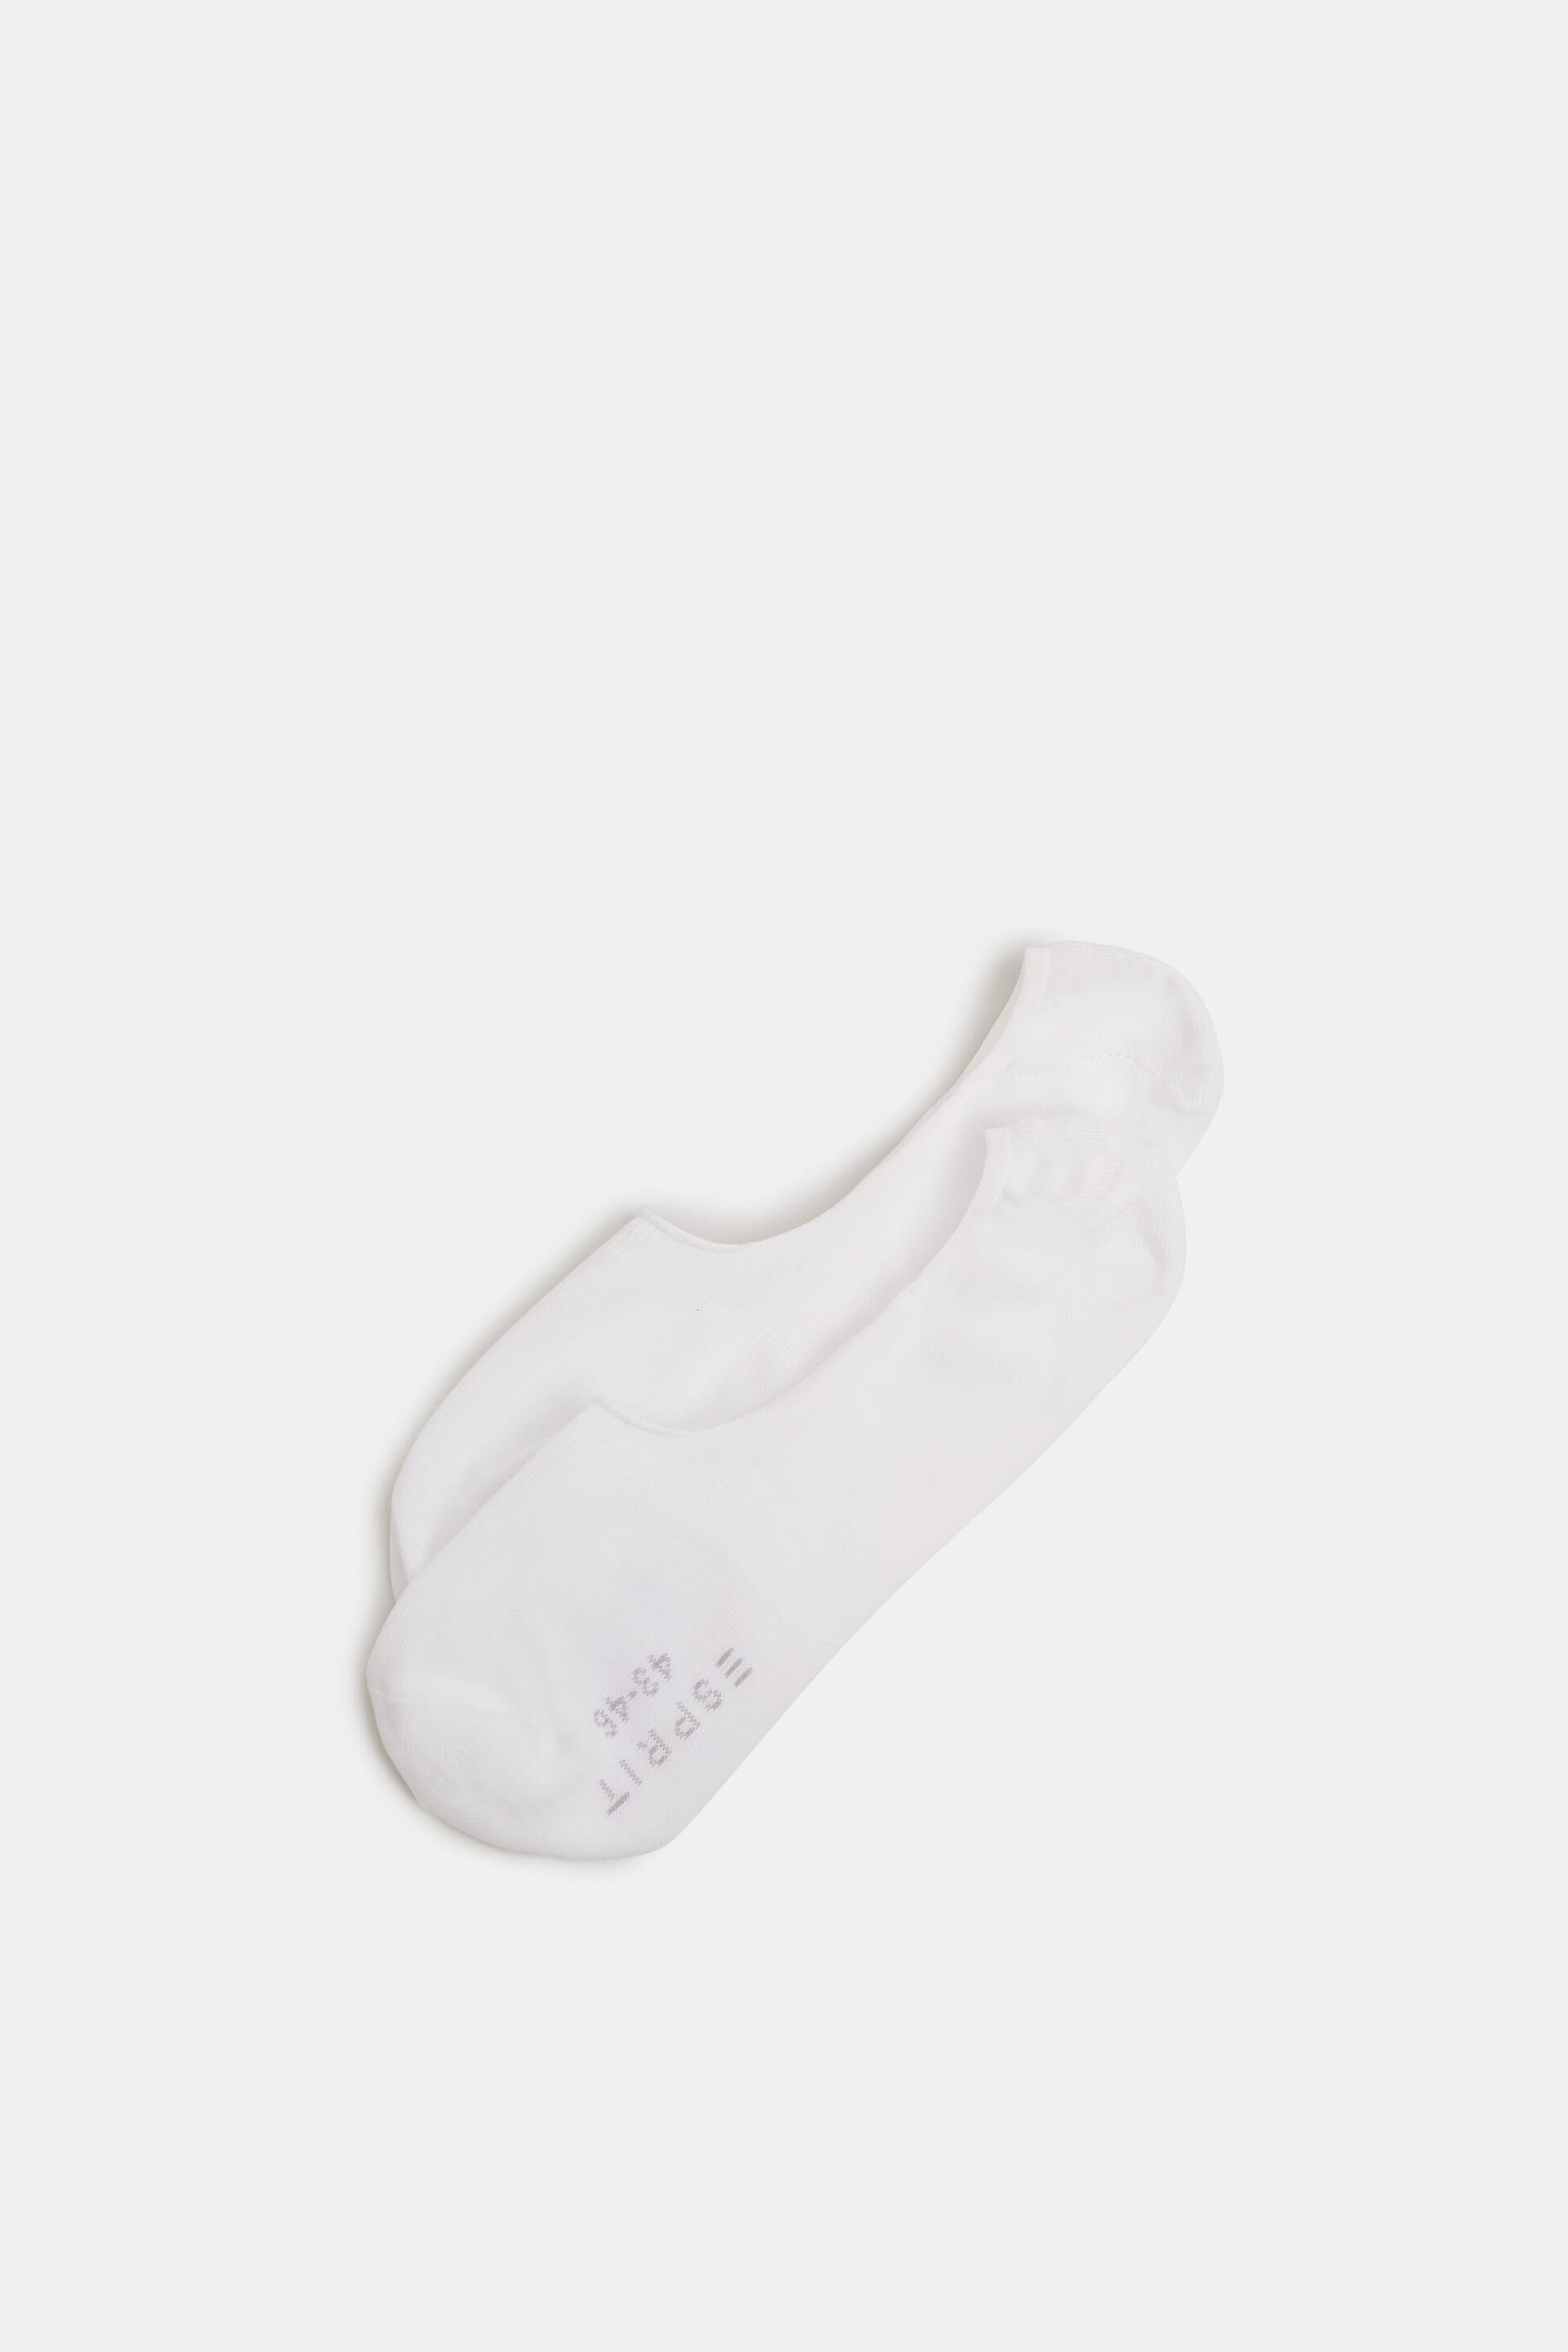 Esprit of an trainer socks finish Double pack with anti-slip